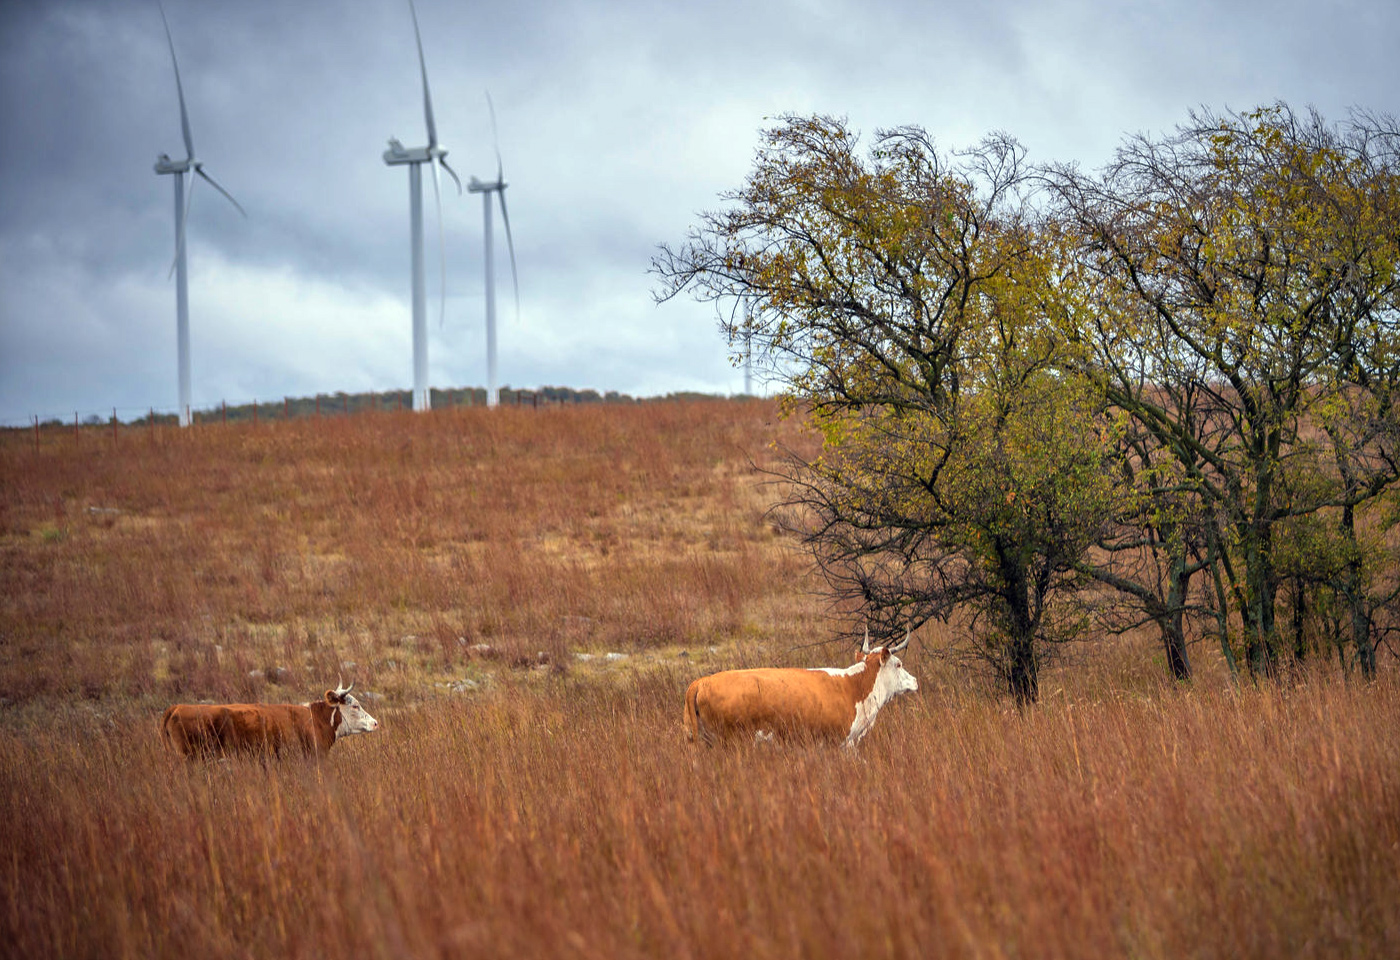 Cows graze in a field with wind turbines visible in background